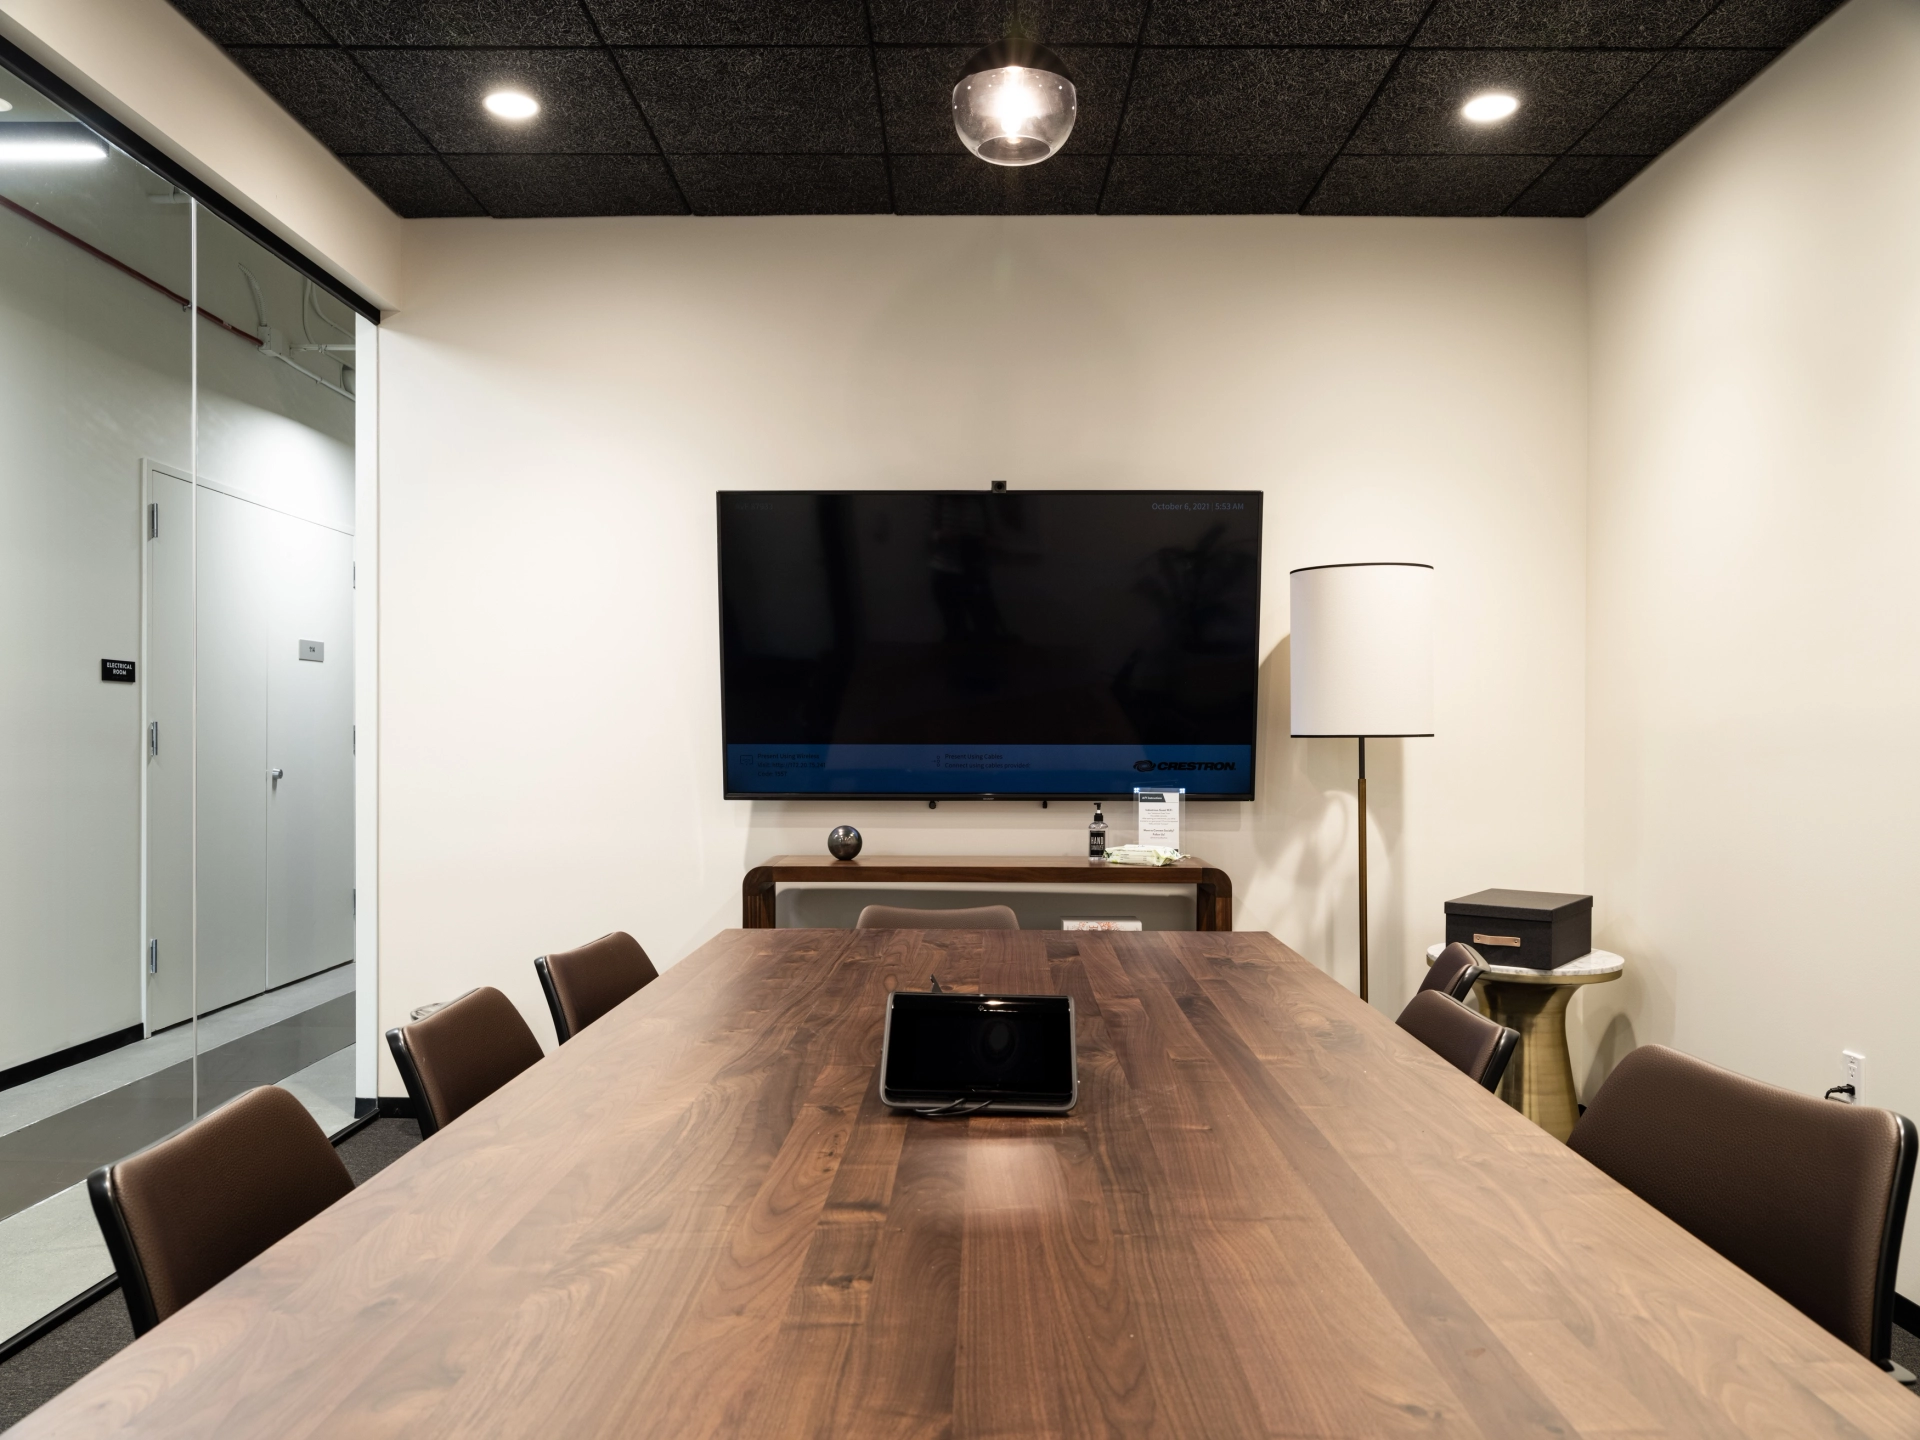 A conference room with a wooden table for office meetings.